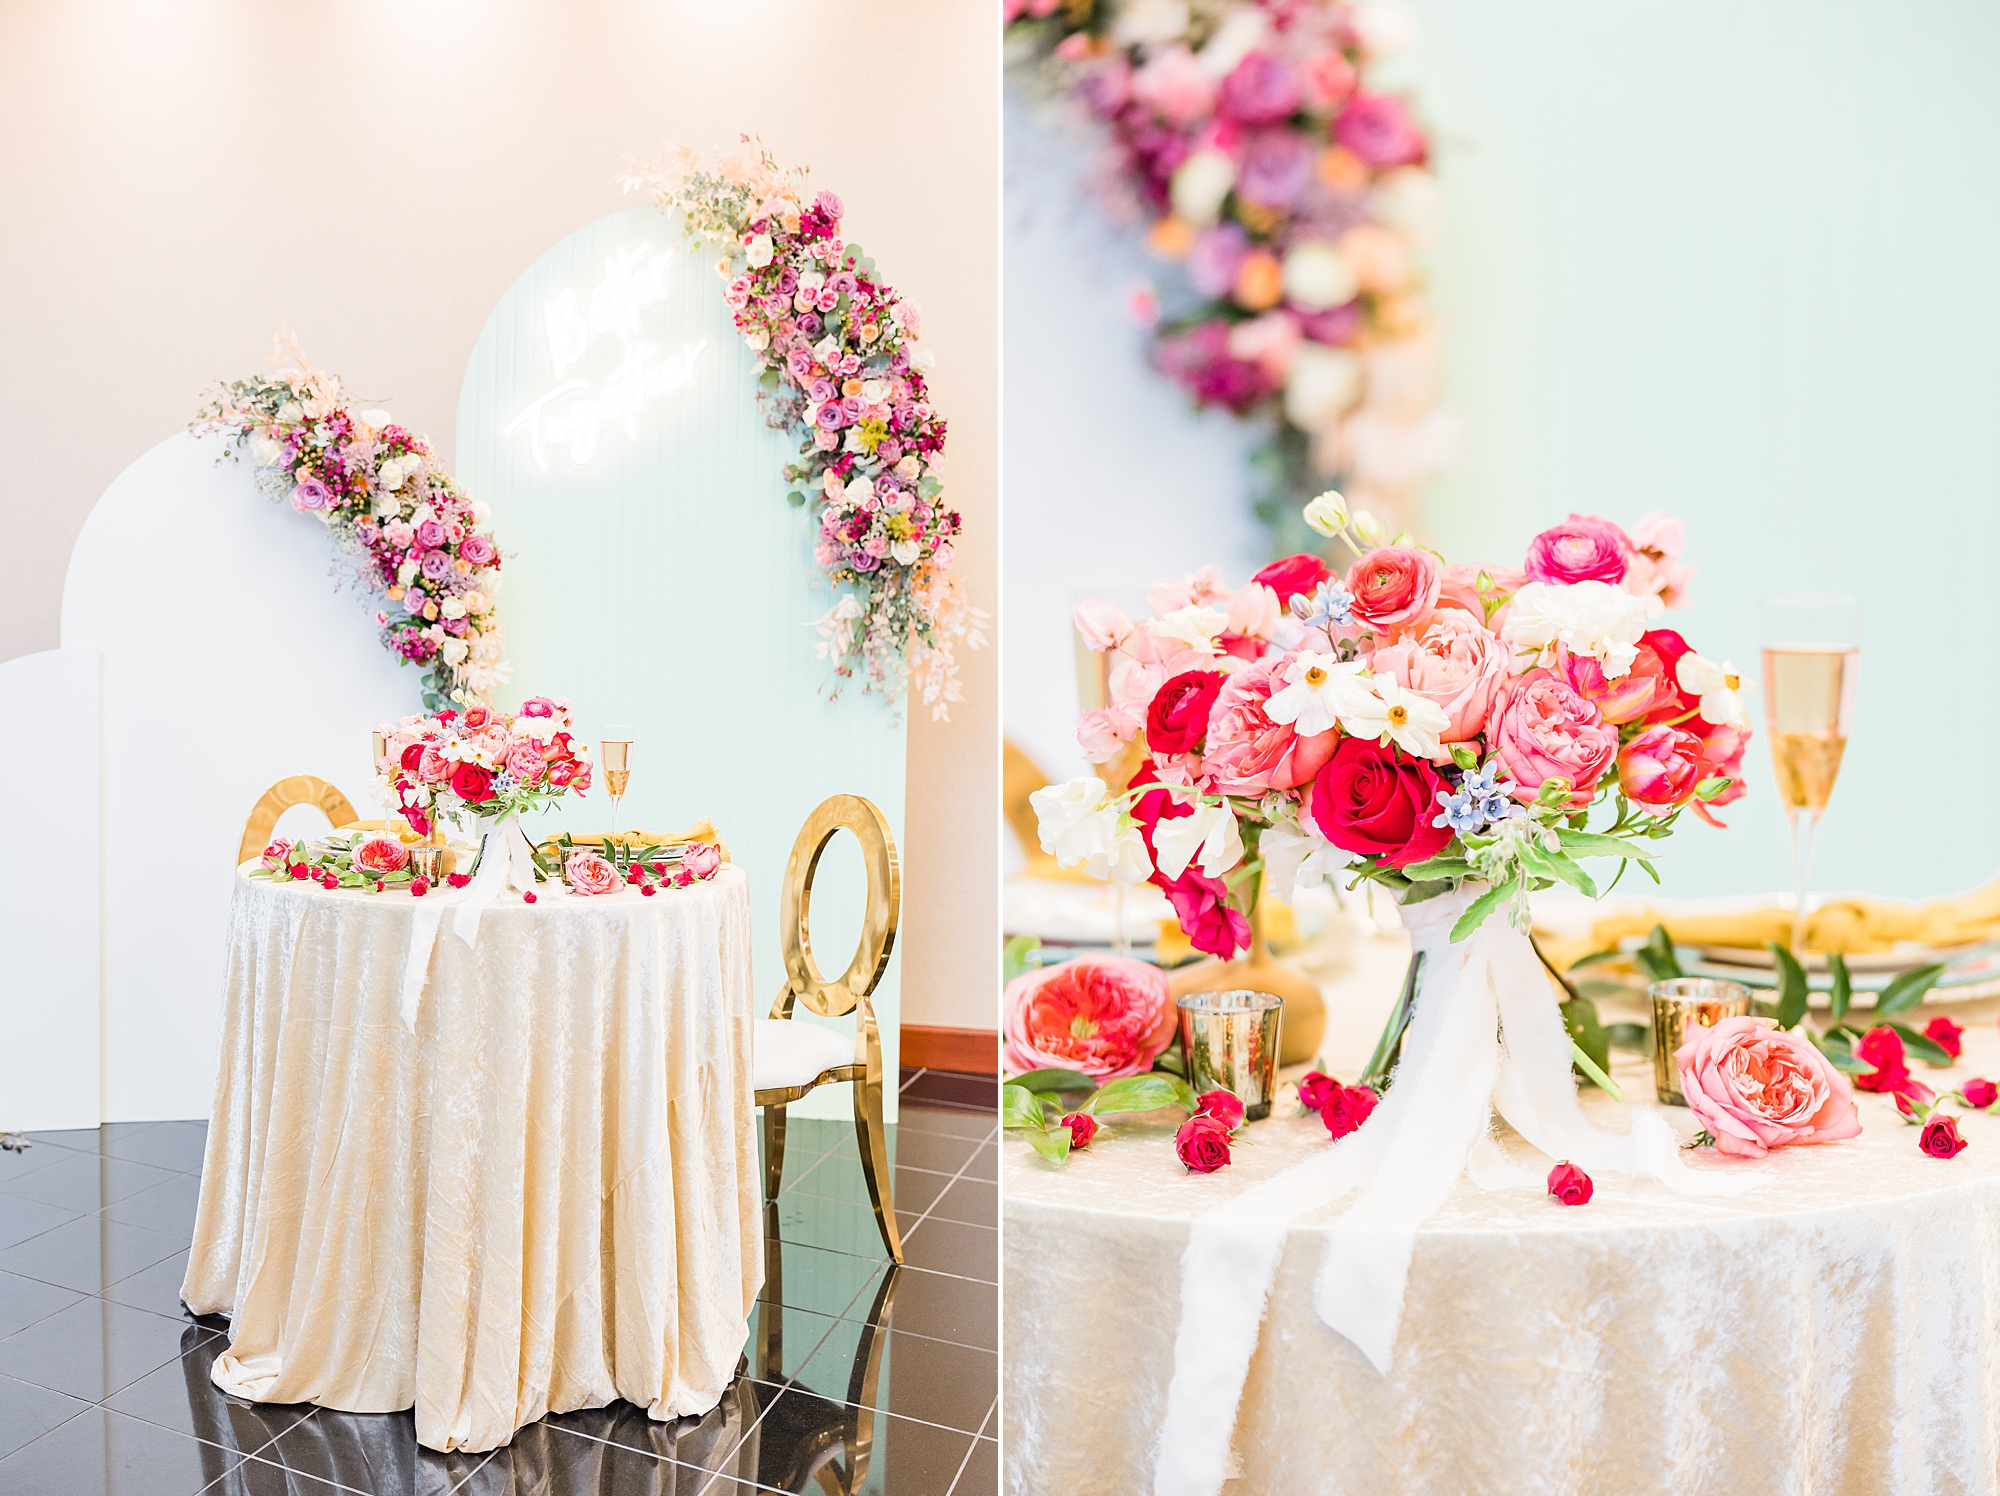 floral display by sweetheart table with pink and red flowers